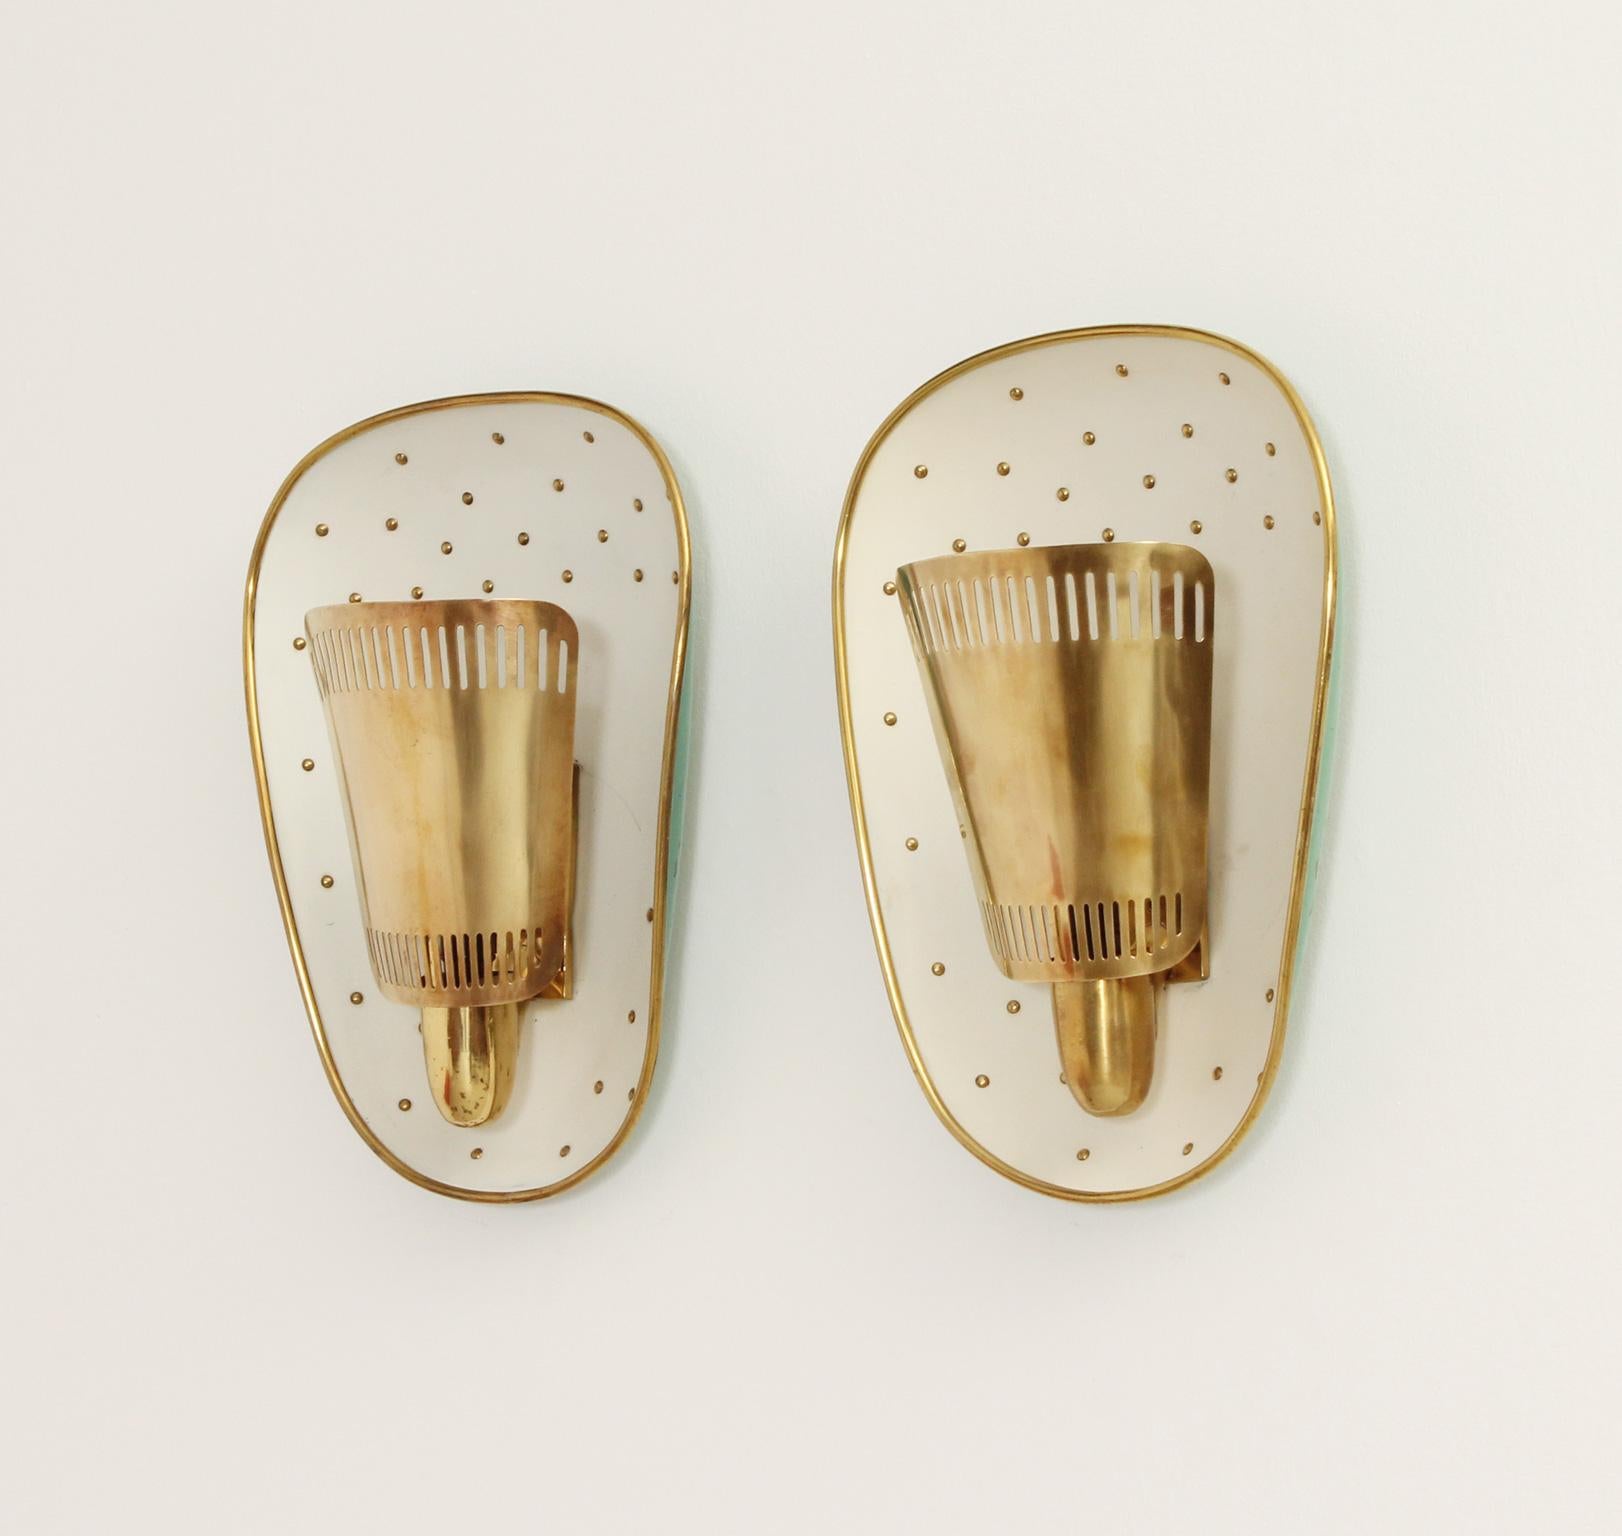 Large Midcentury Sconces Attributed to Hillebrand, Germany, 1950s In Good Condition For Sale In Barcelona, ES